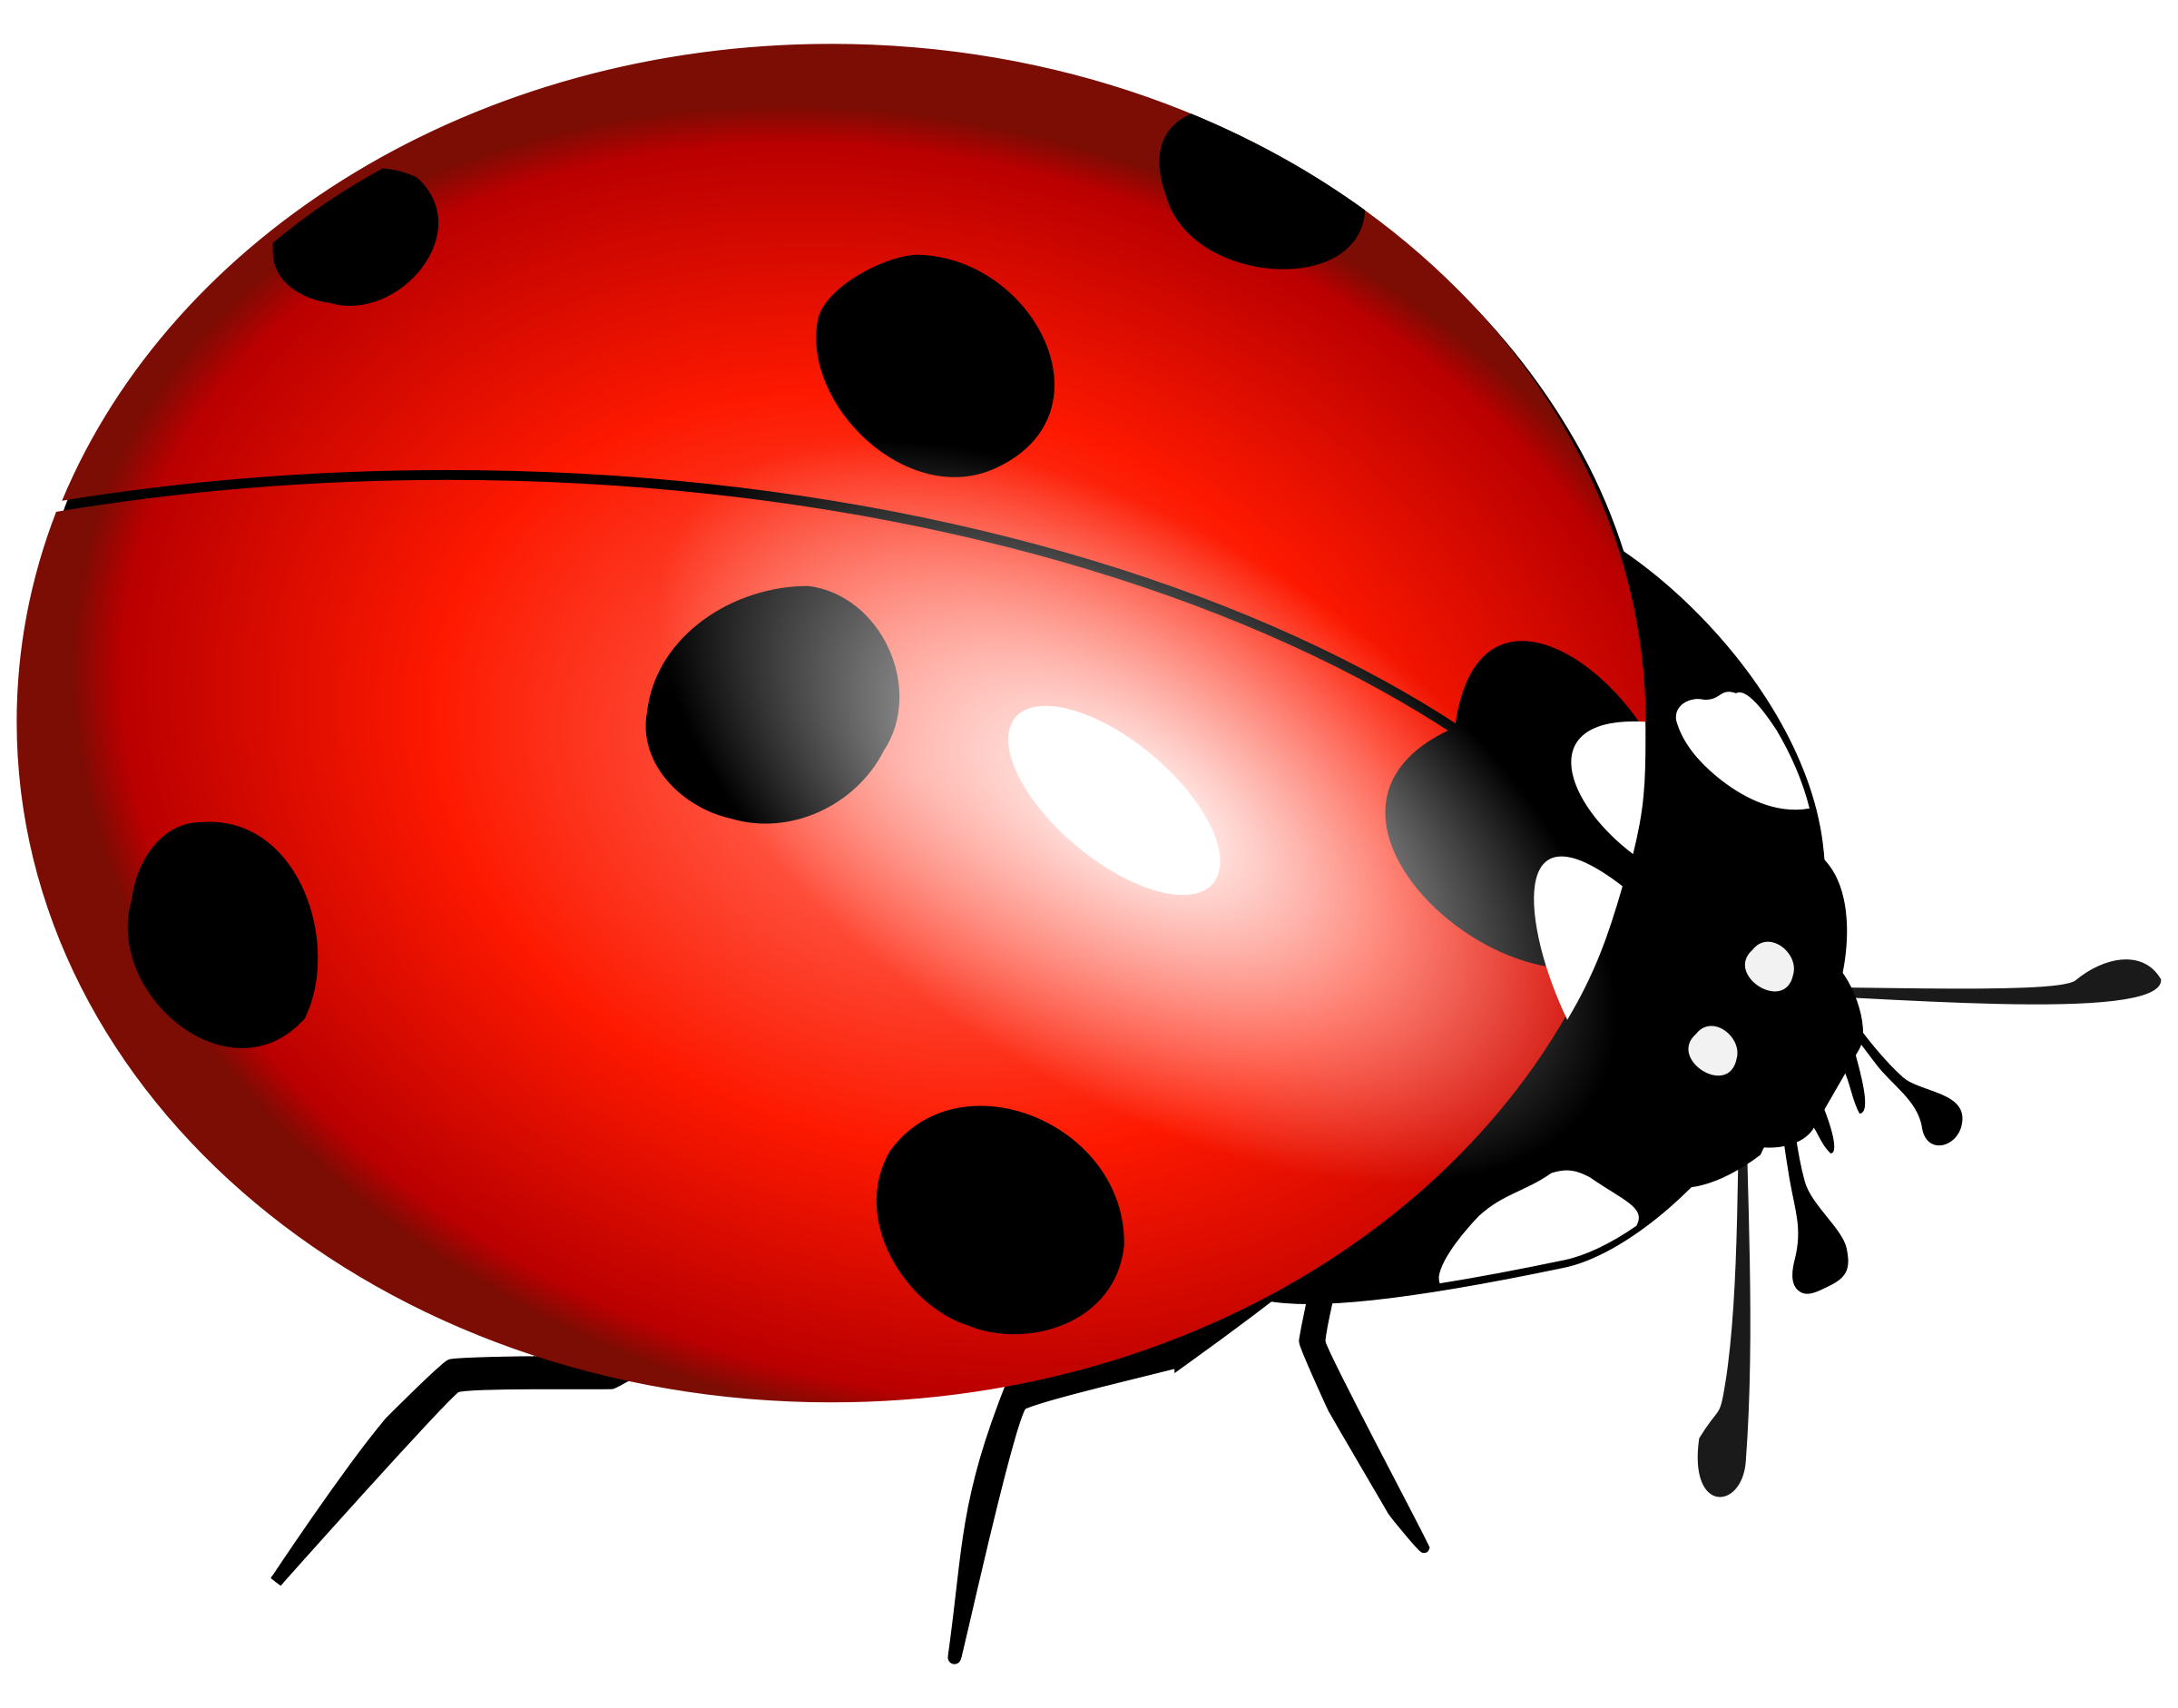 Download free bug clipart clipartmonk free clip art images